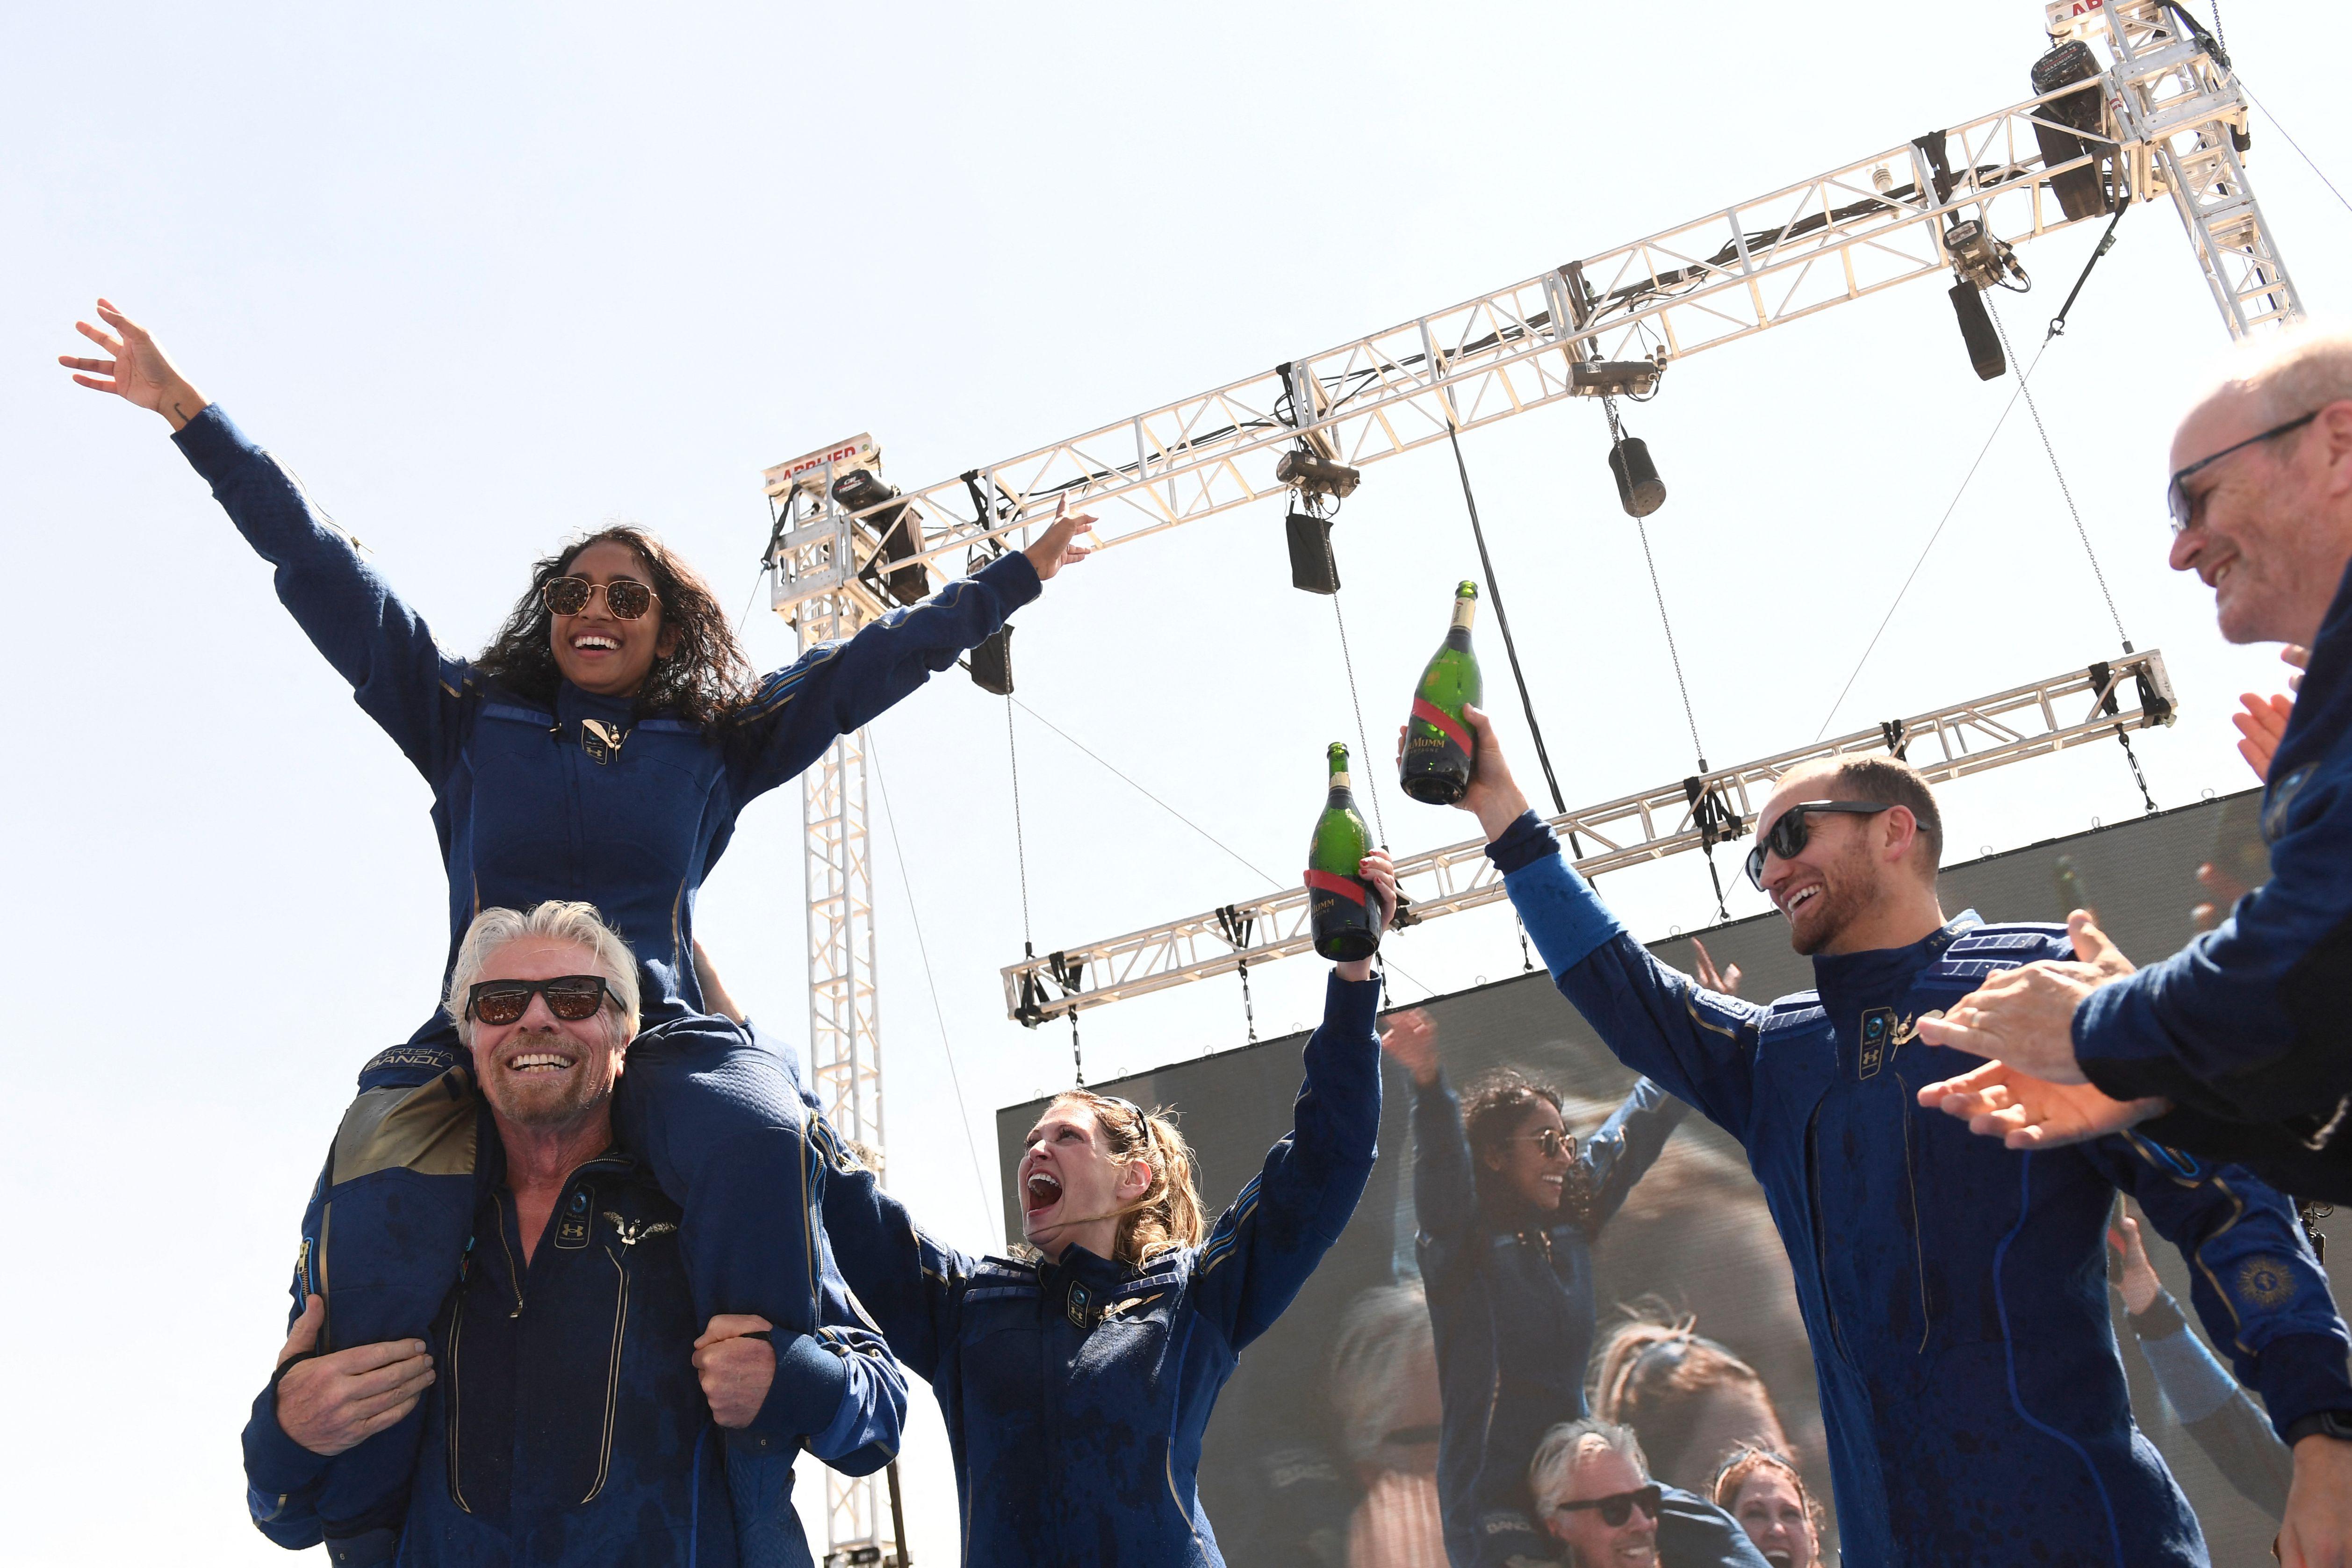 Virgin Galactic founder Sir Richard Branson(L), with Sirisha Bandla on his shoulders, cheers with crew members after flying into space aboard a Virgin Galactic vessel, near Truth and Consequences, New Mexico on July 11, 2021.